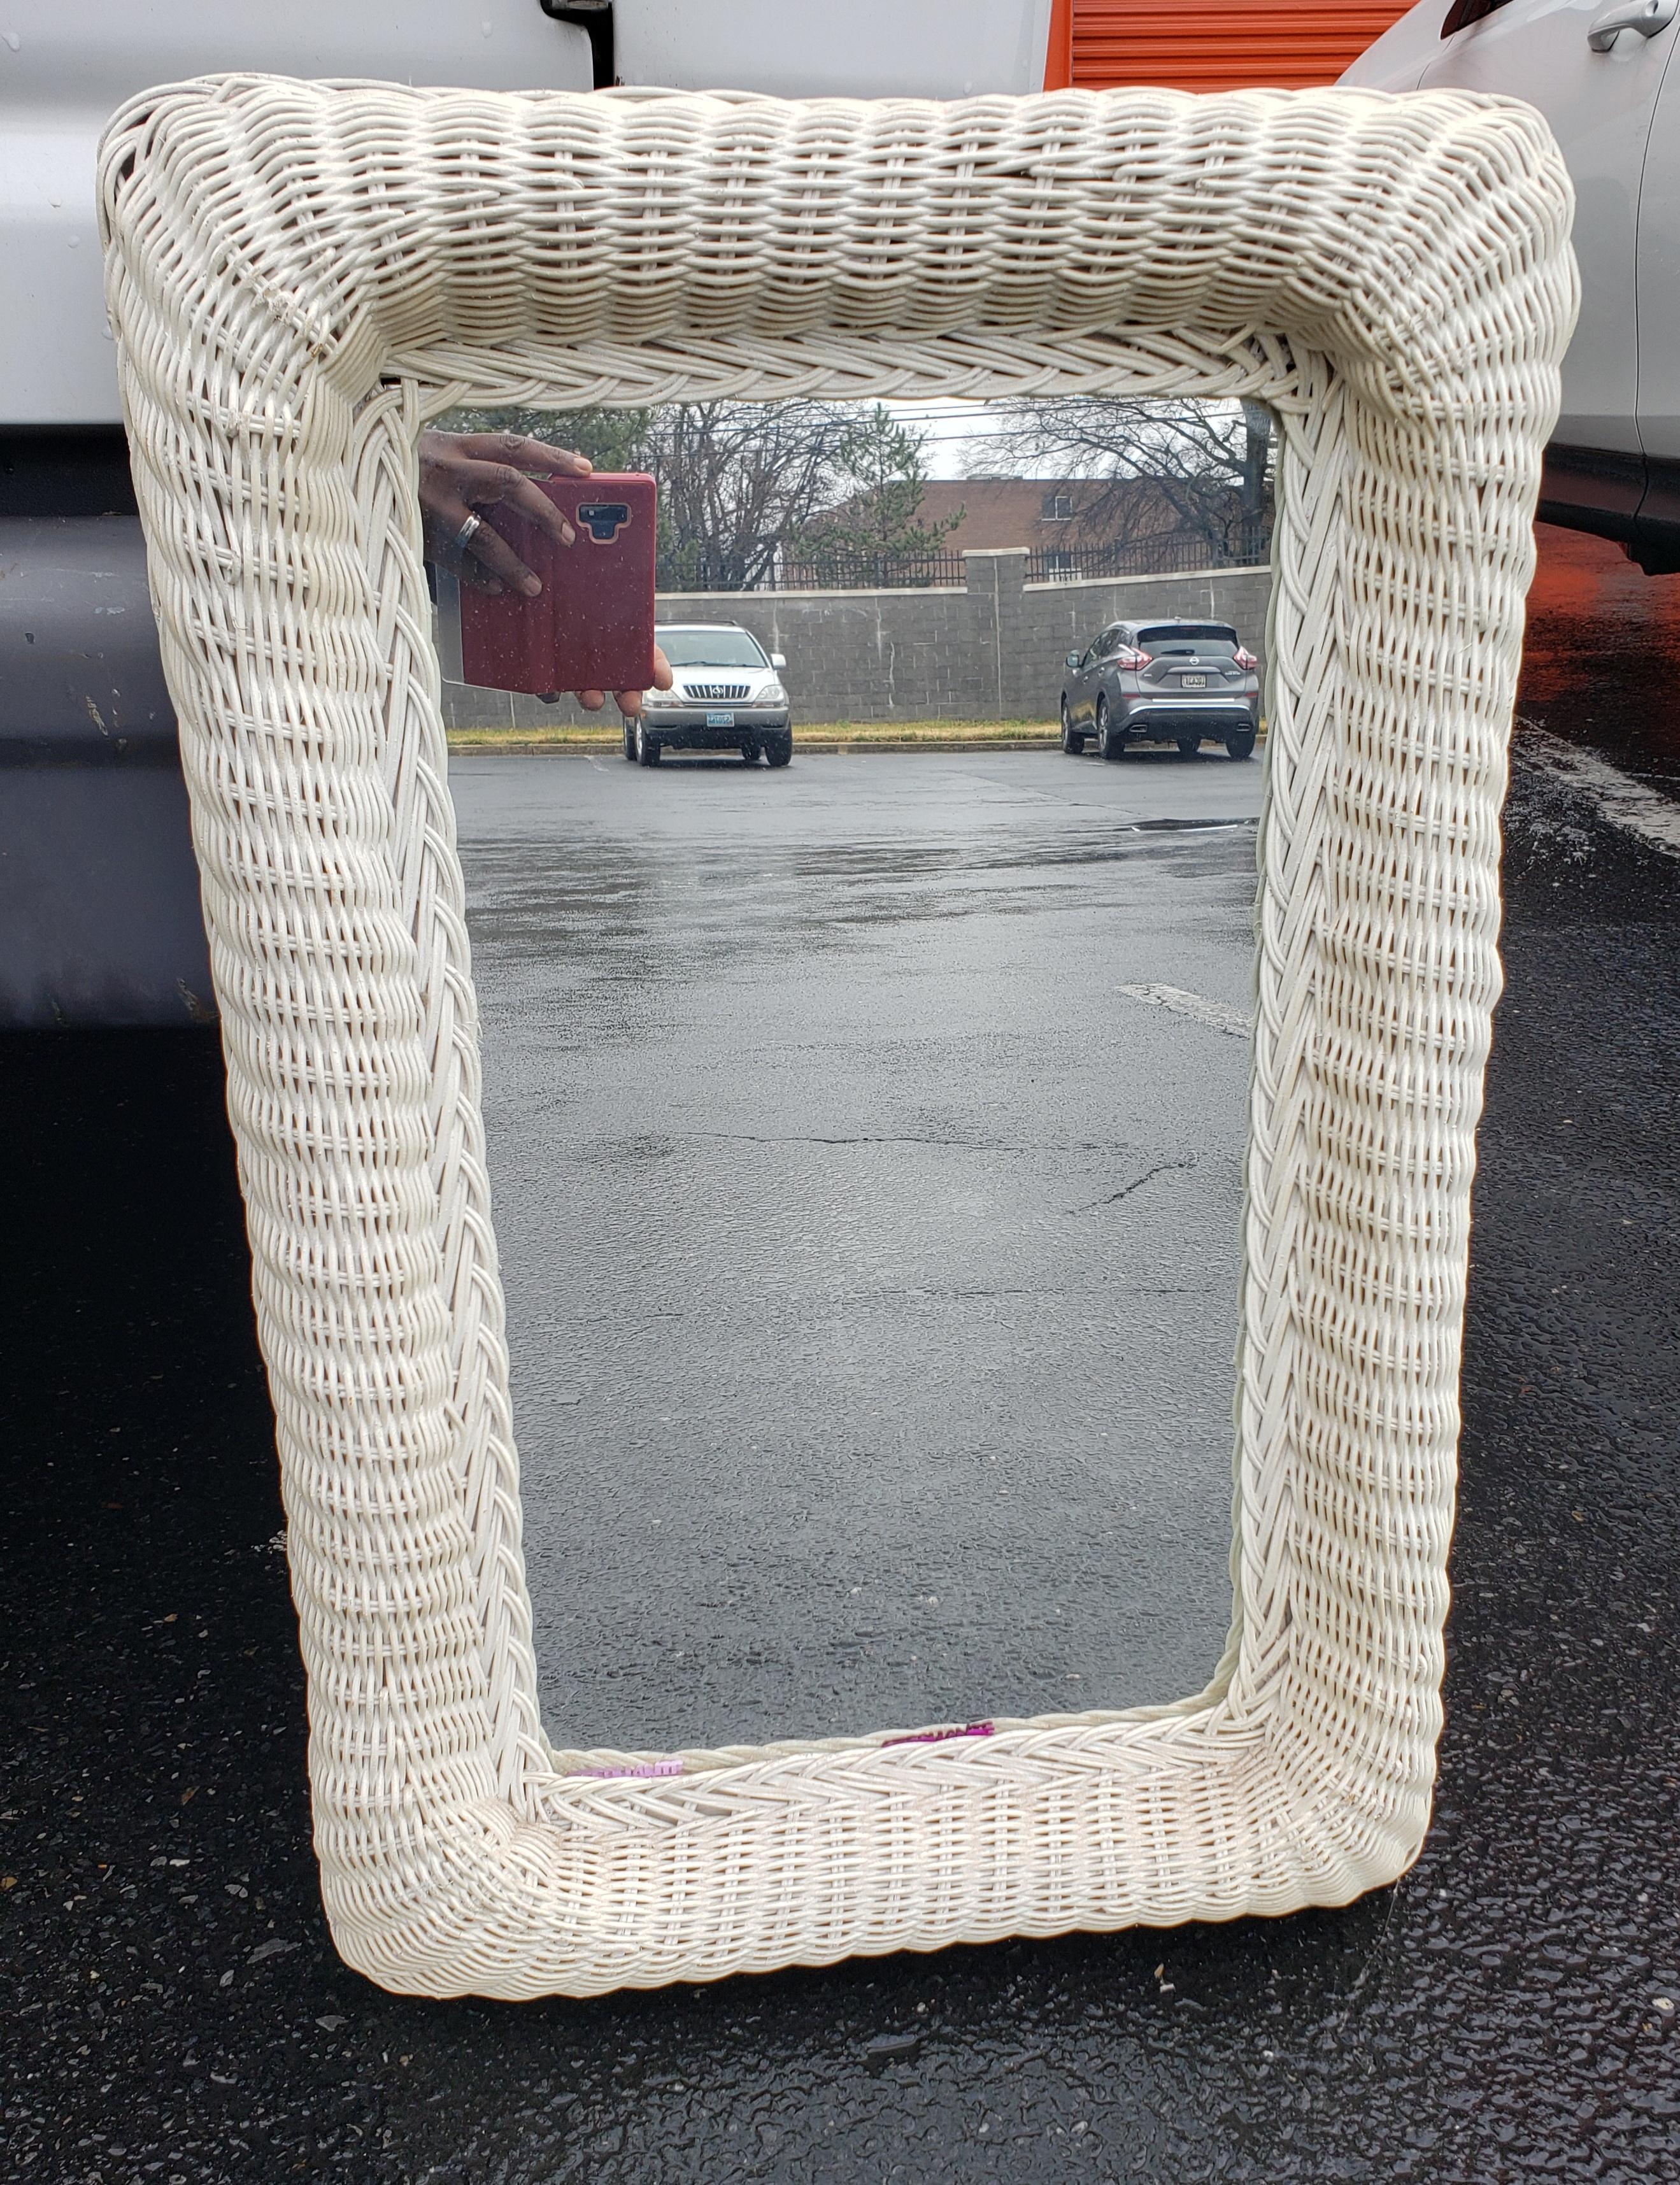 Shabby Chic White Wall Mirror is a Vintage Estate Treasure that will add a Romantic feel to any room in the House or to use for a Vintage Style Wedding.
Add this pretty Wicker Mirror to a Wall or to use as a Vanity Mirror Tray for your Dressing